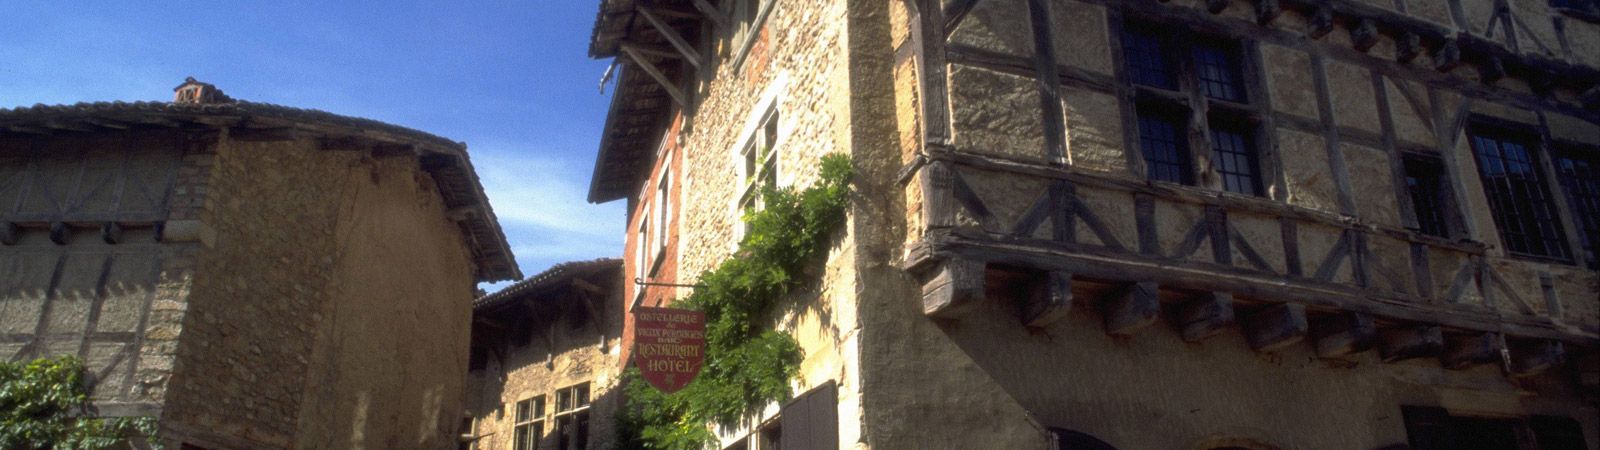 Beaujolais and Pérouges - Full day